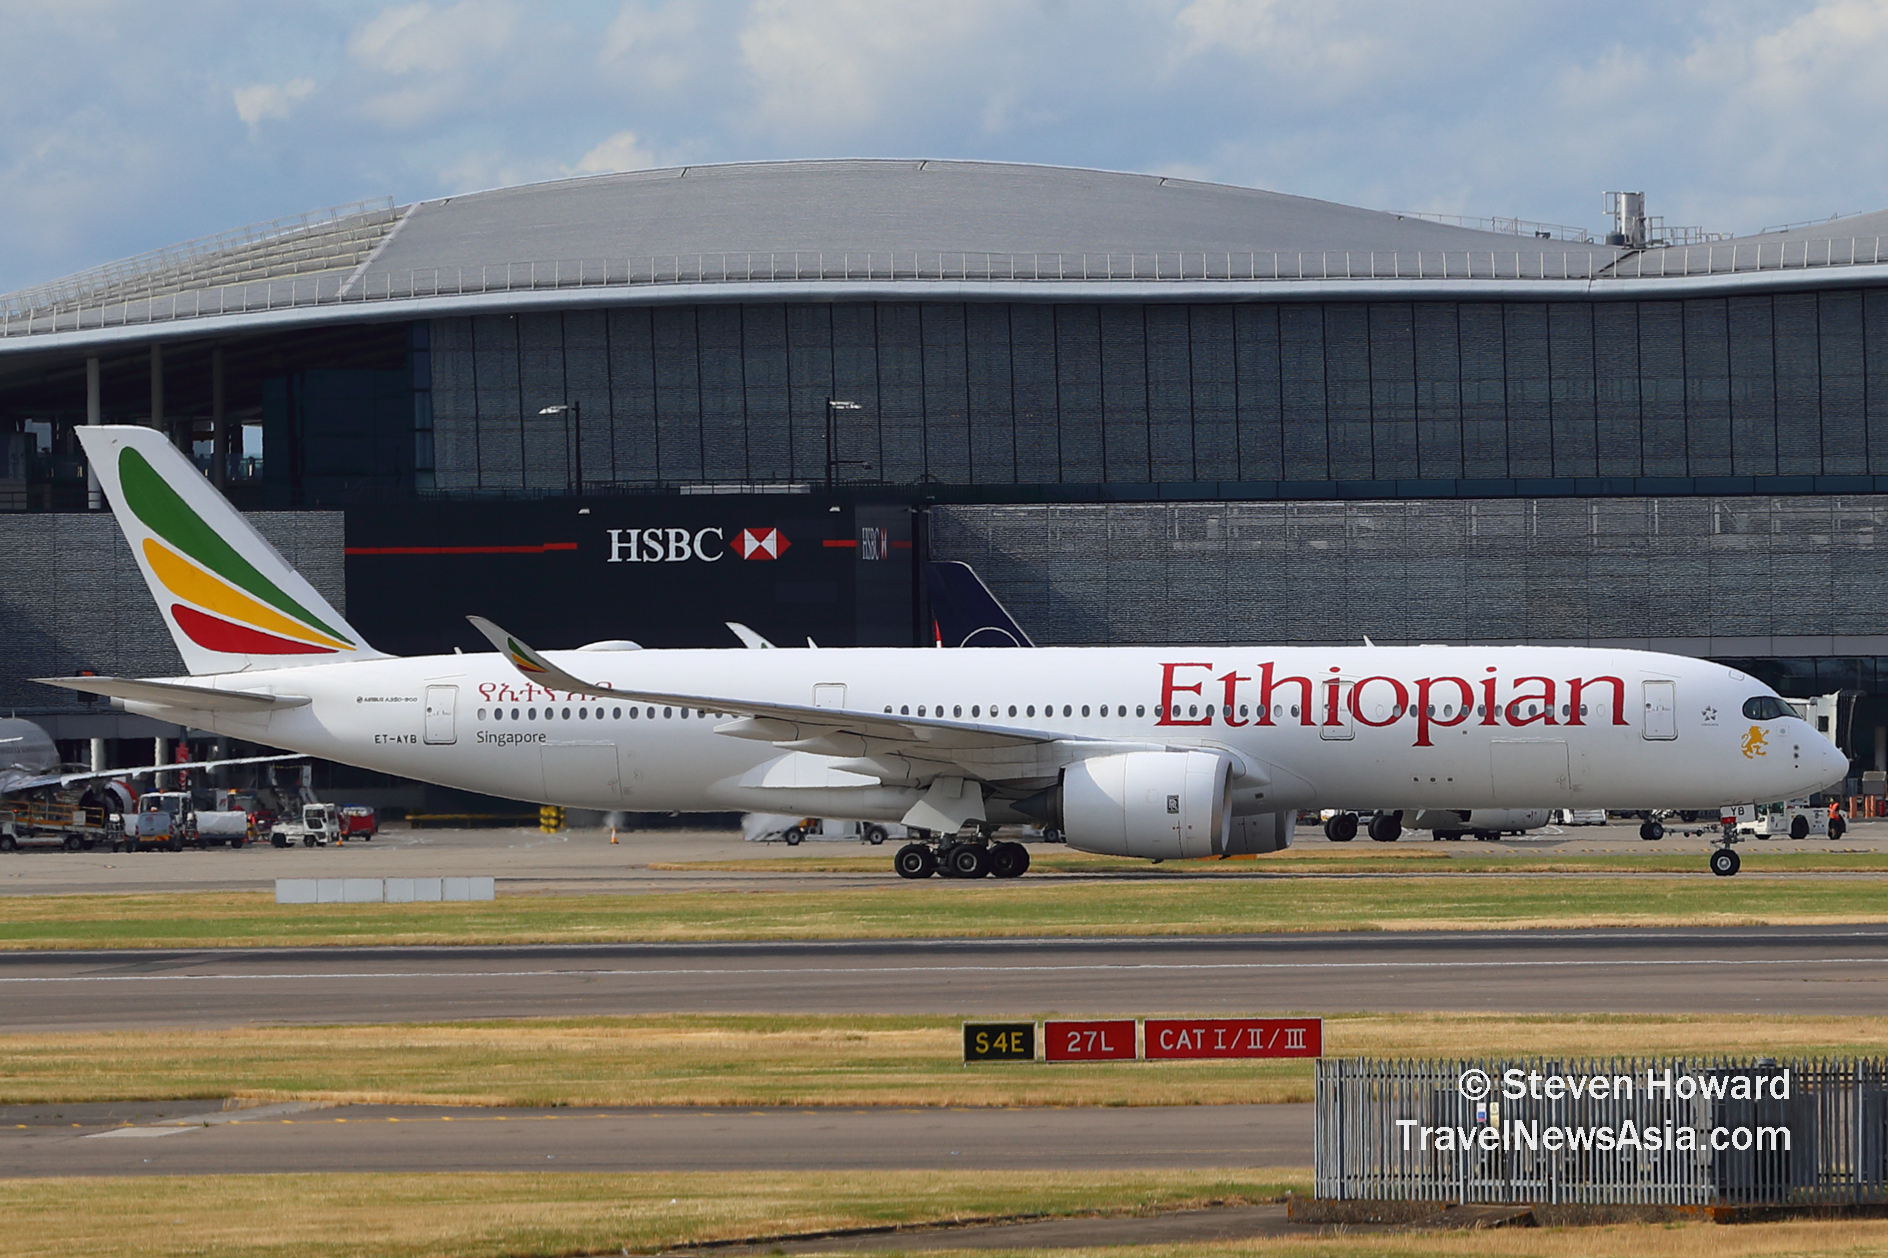 Ethiopian Airlines Airbus A350-900 reg: ET-AYB. Picture by Steven Howard of TravelNewsAsia.com Click to enlarge.